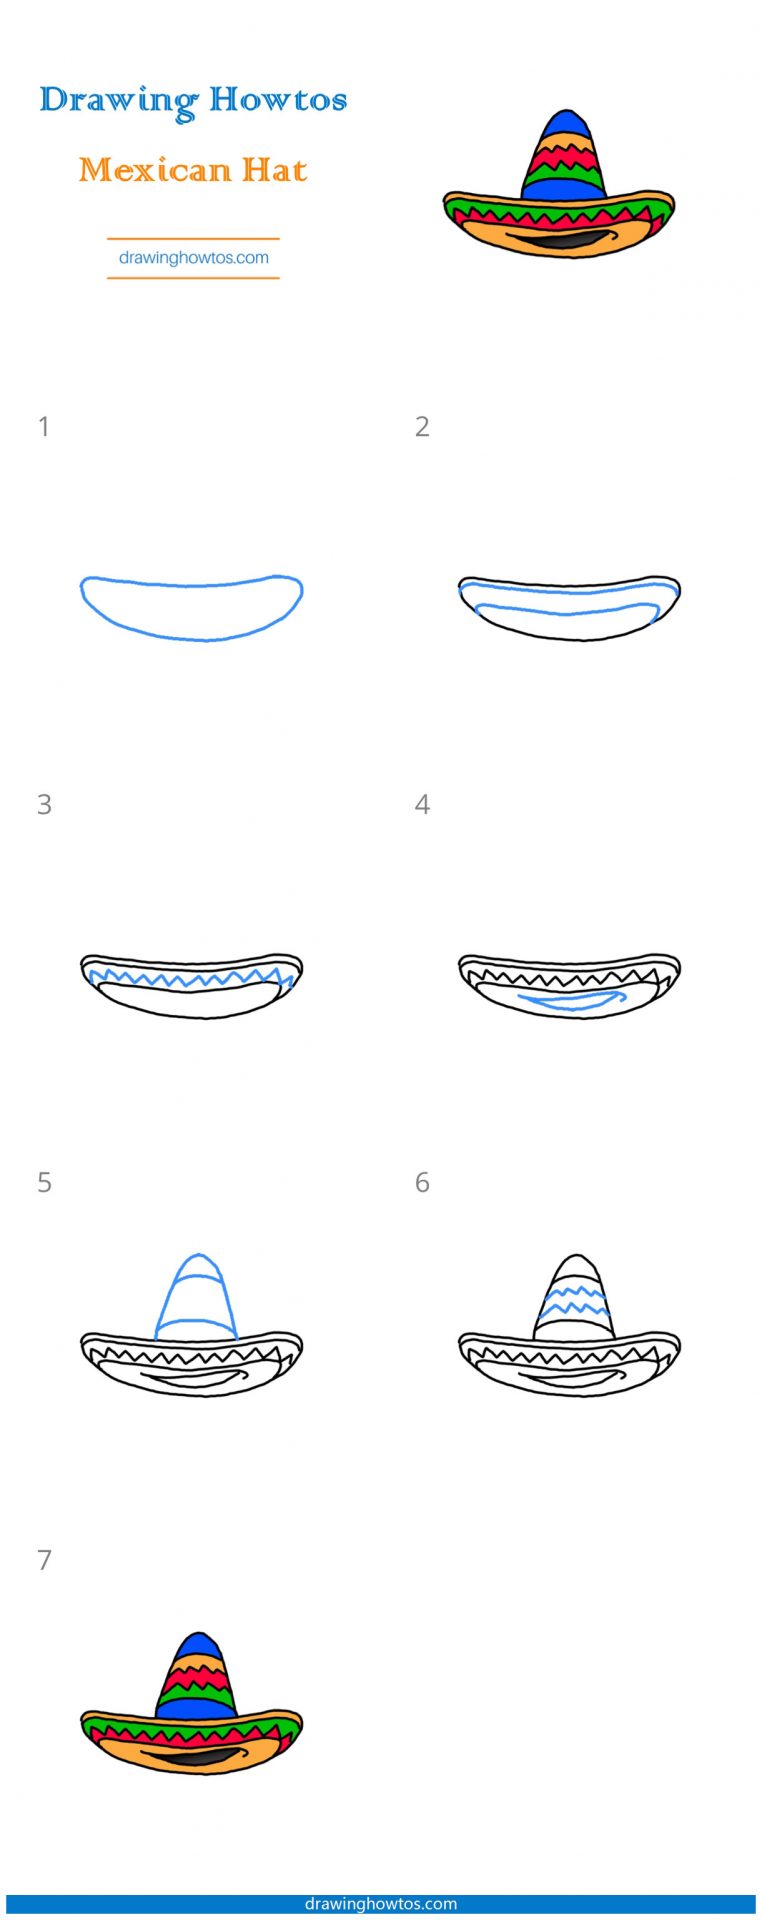 How to Draw a Mexican Hat Step by Step